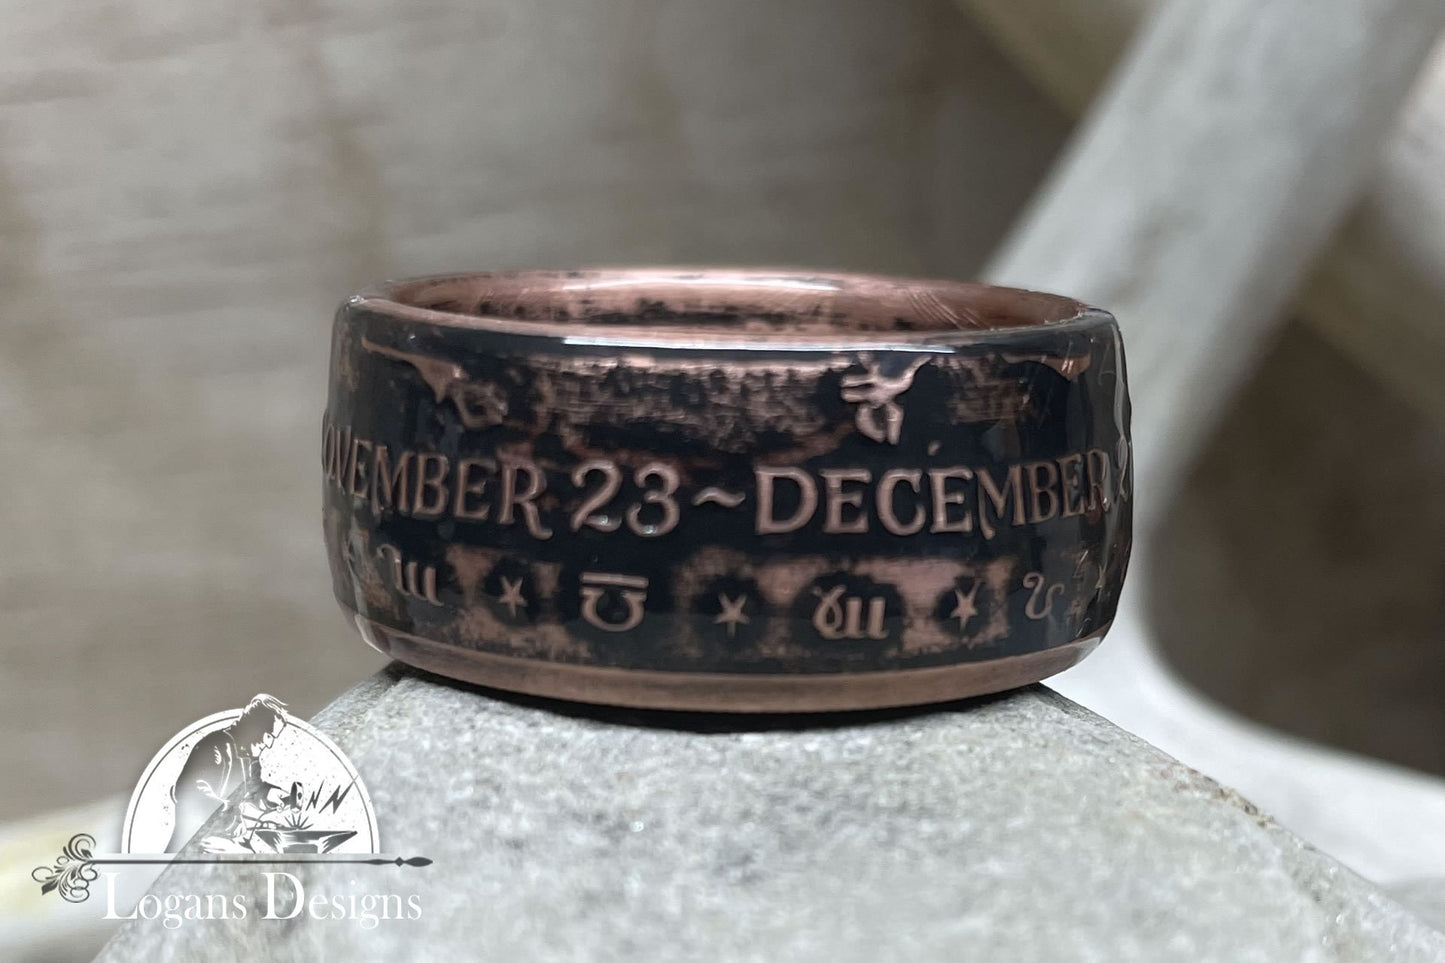 Sagittarius Coin Ring Handcrafted 1 Oz .999% Copper Size 8-14 Powder Coated Unique Copper ring.